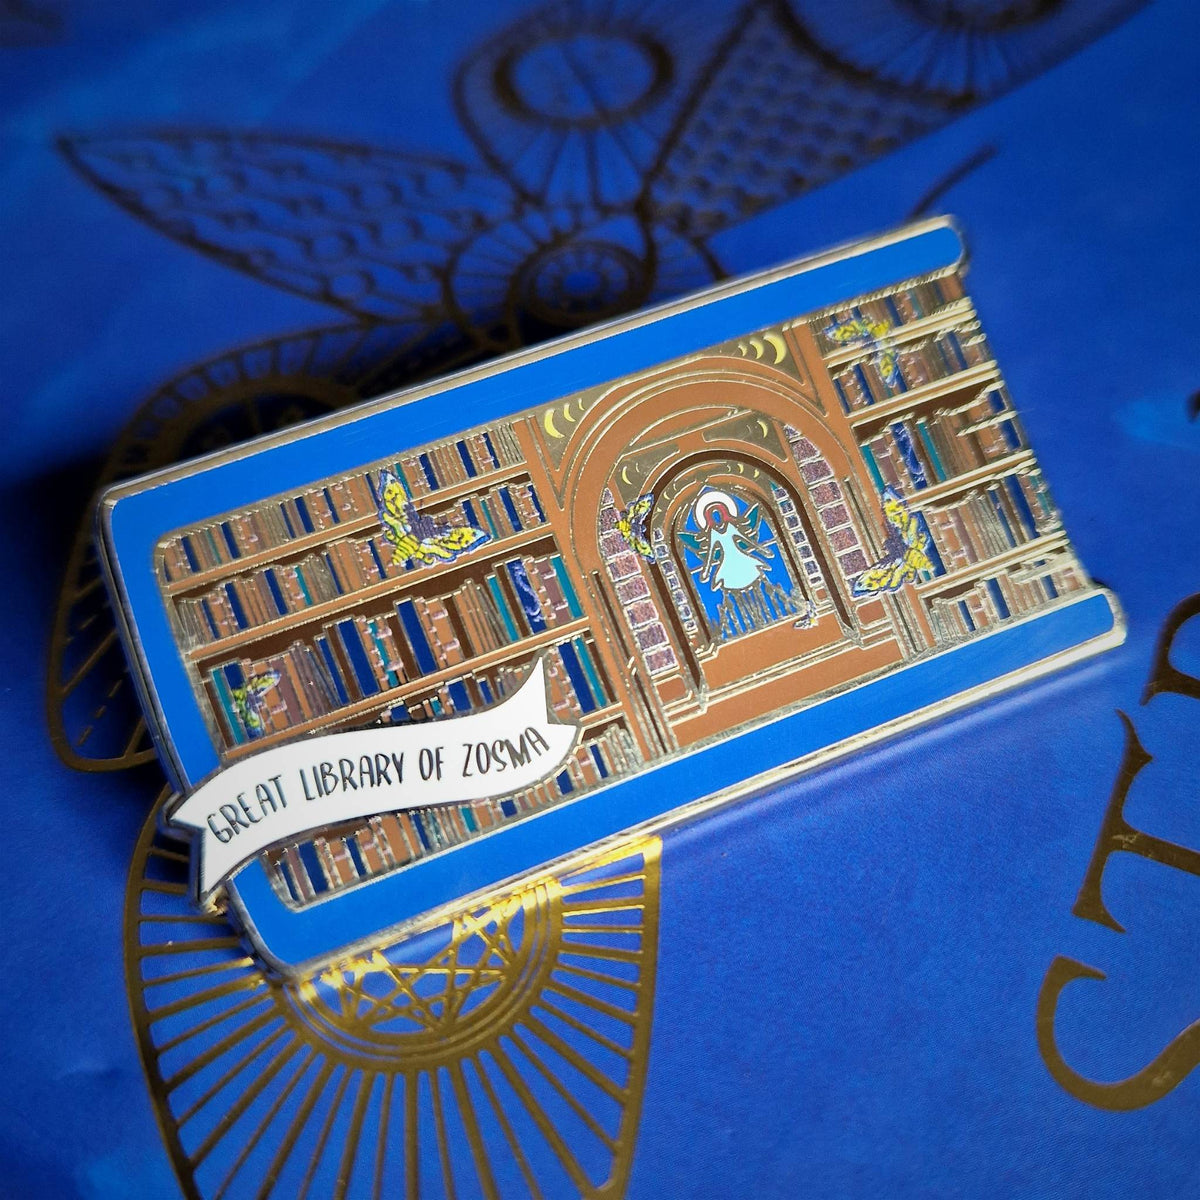 Great Library of Zosma - Build Your Own Book Stack 2.0 - Enamel Pin